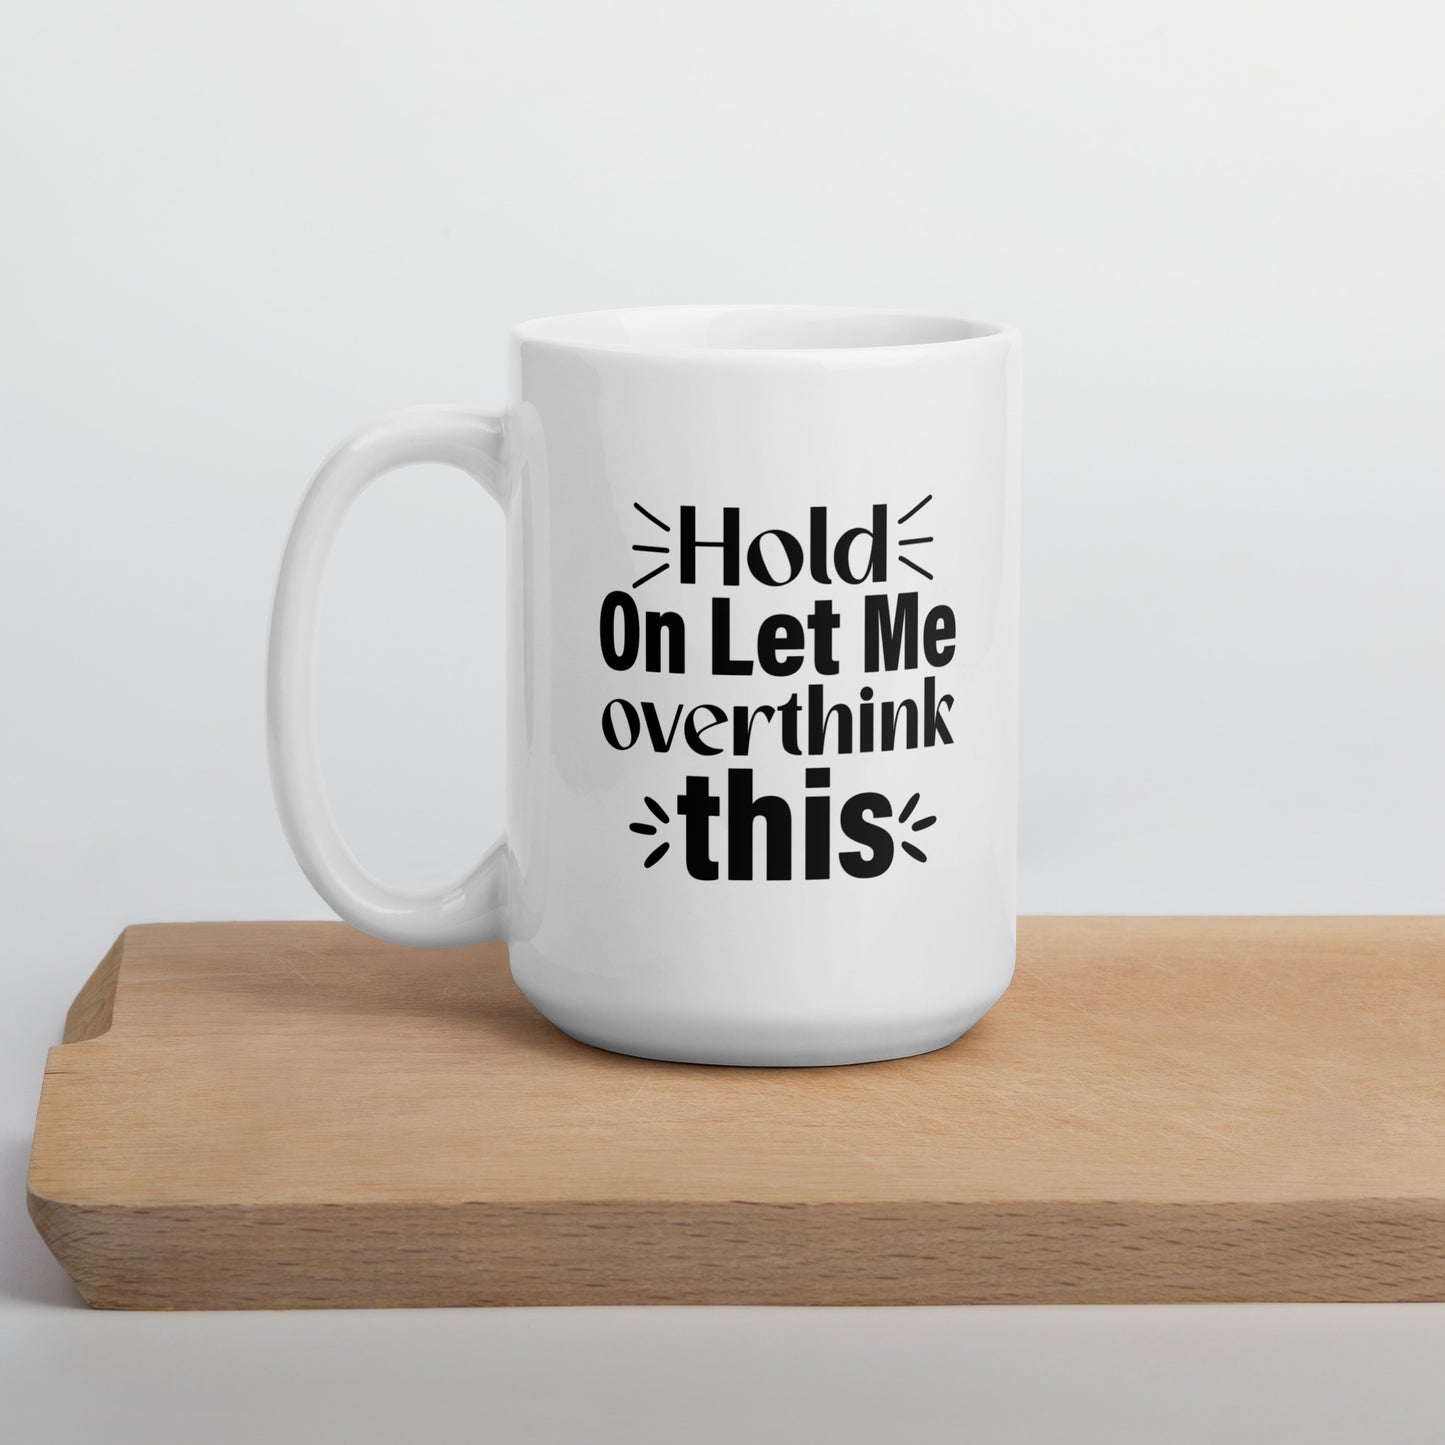 Hold On, Let Me Over Think This White Ceramic Coffee Mug